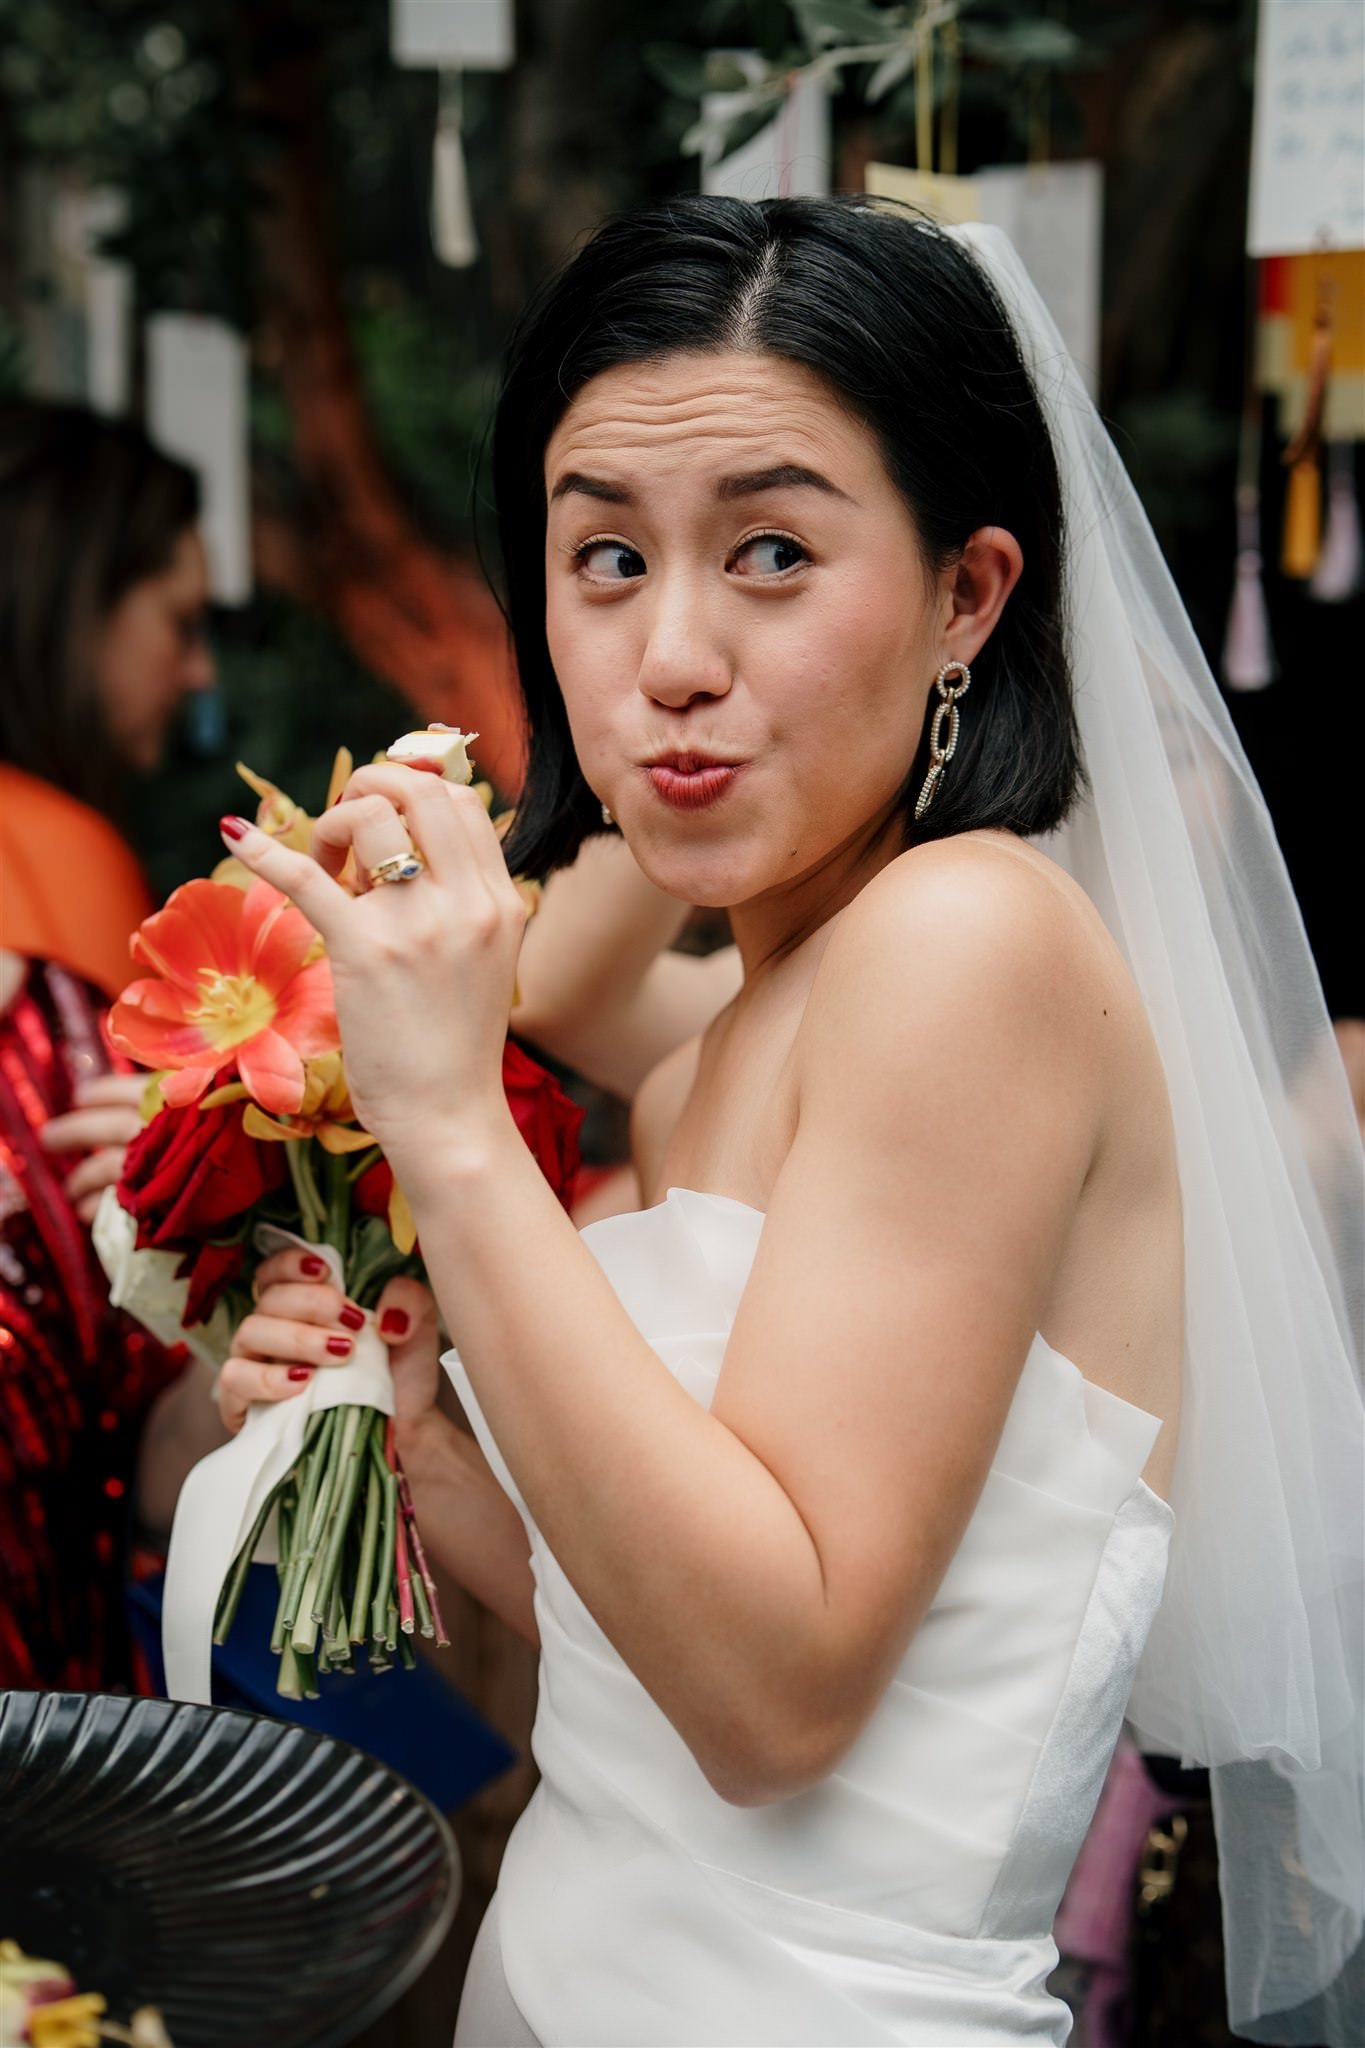 glasshouse-morningside-urban-best-auckland-wedding-venue-central-indoor-photographer-videographer-dear-white-productions-top-industrial-chinese-ceremony-tradition (85).jpg